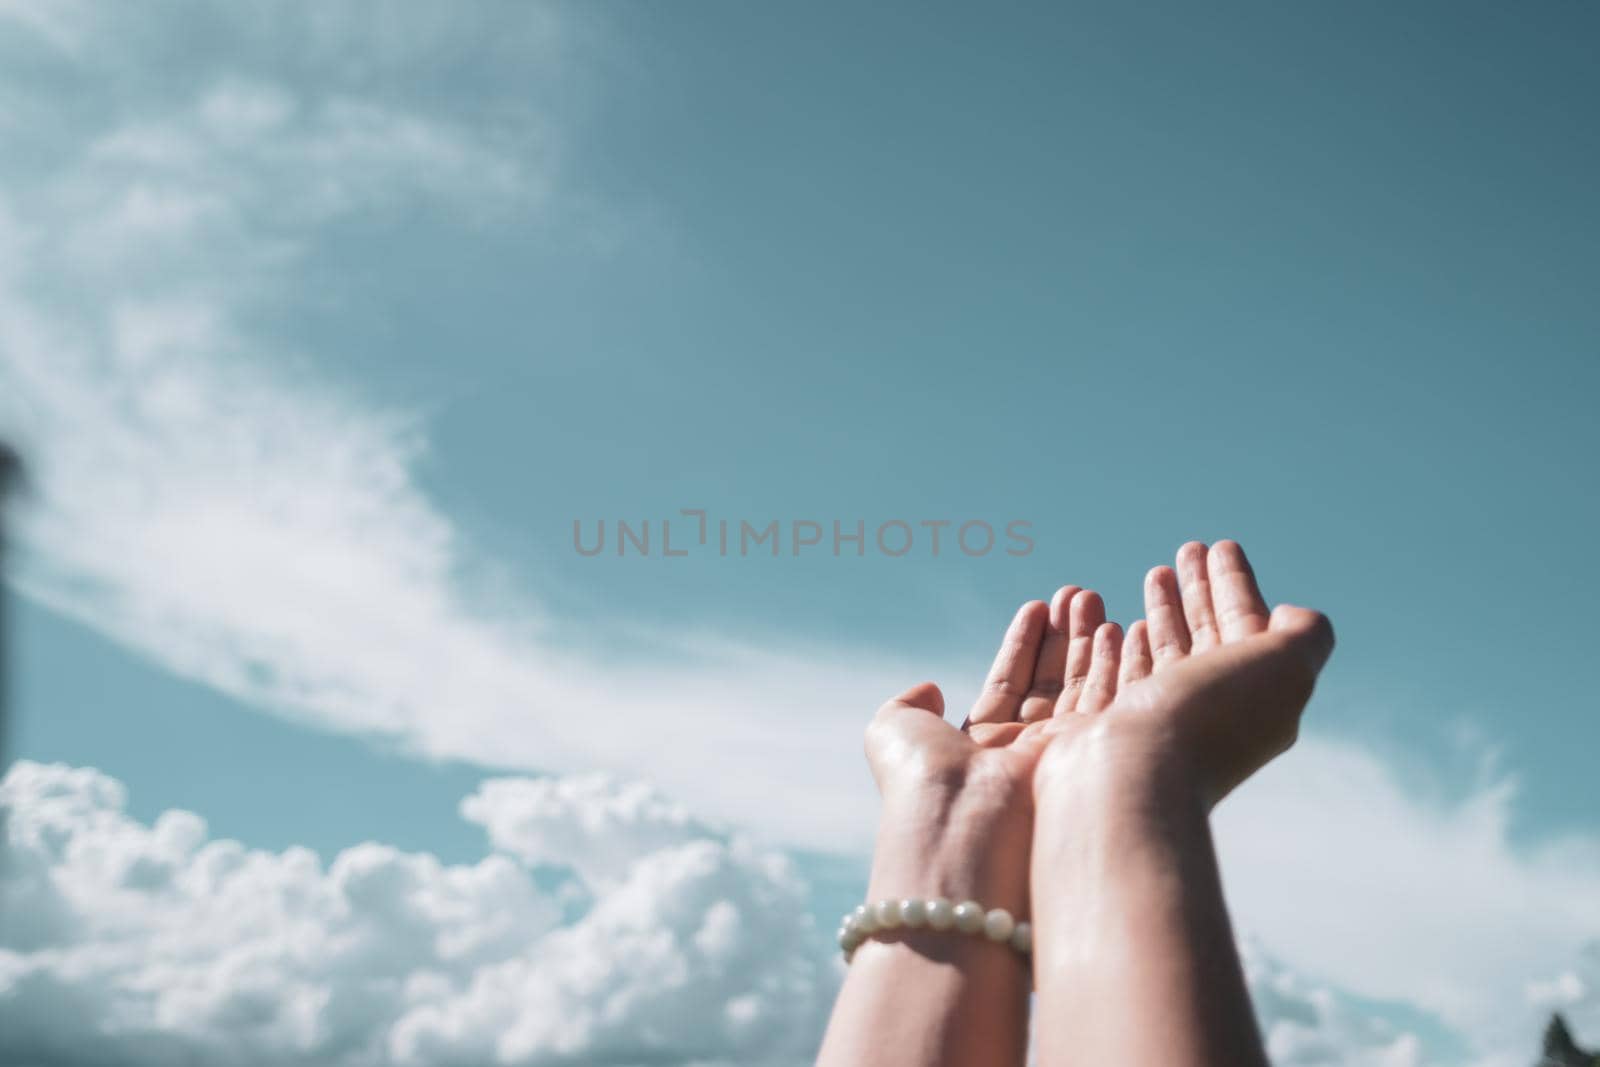 Woman hands place together like praying in front of blue sky background. by Suwant